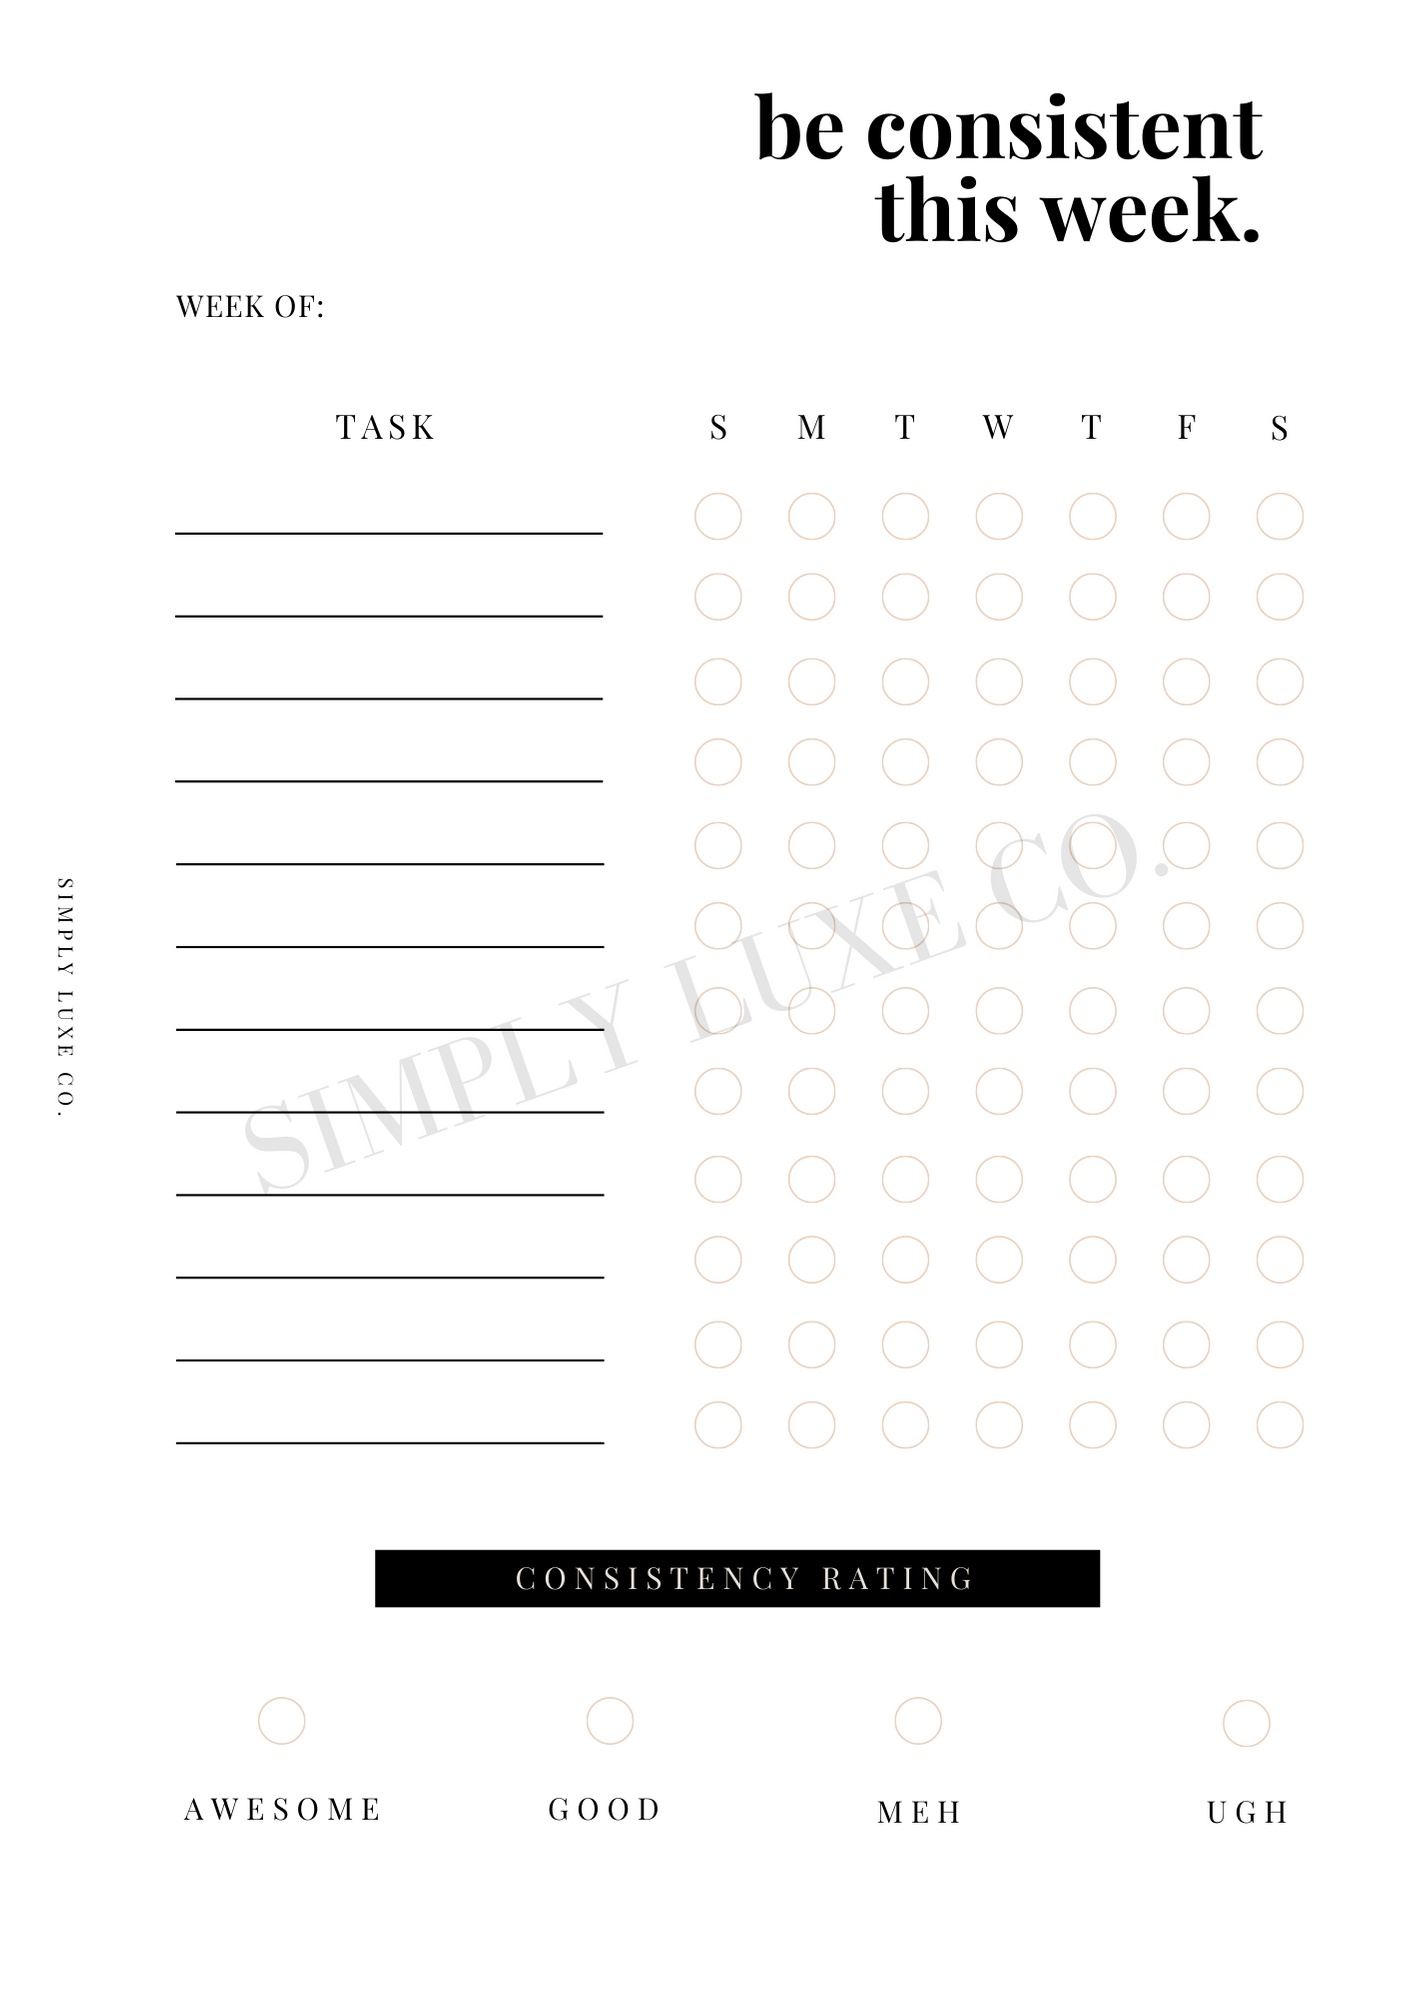 Consistency Tracker Printable Inserts